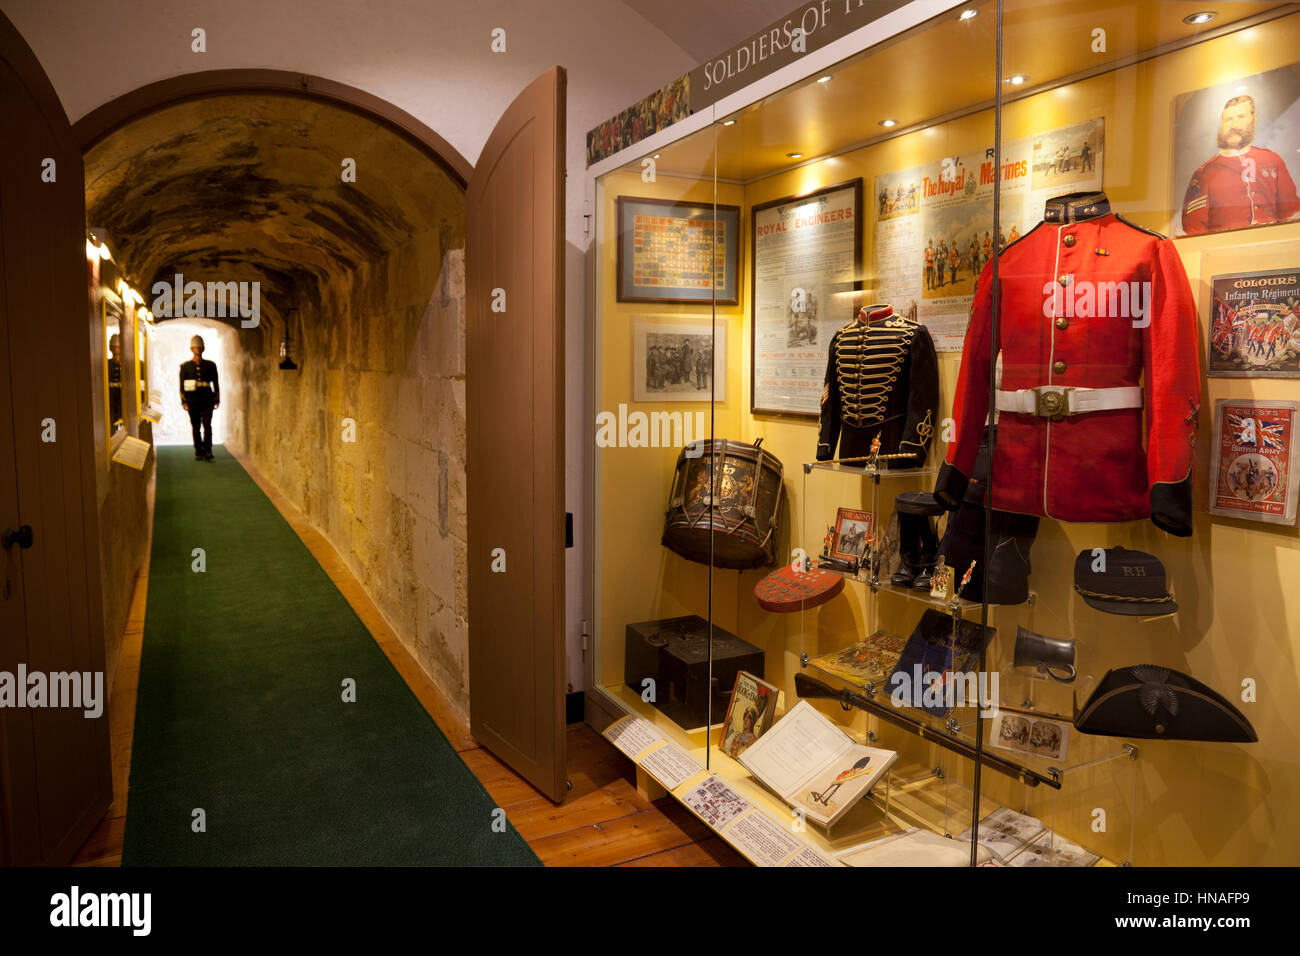 A site guide in historial British military uniform walks down a corridor towards the displays of nineteenth century British military artifacts and col Stock Photo